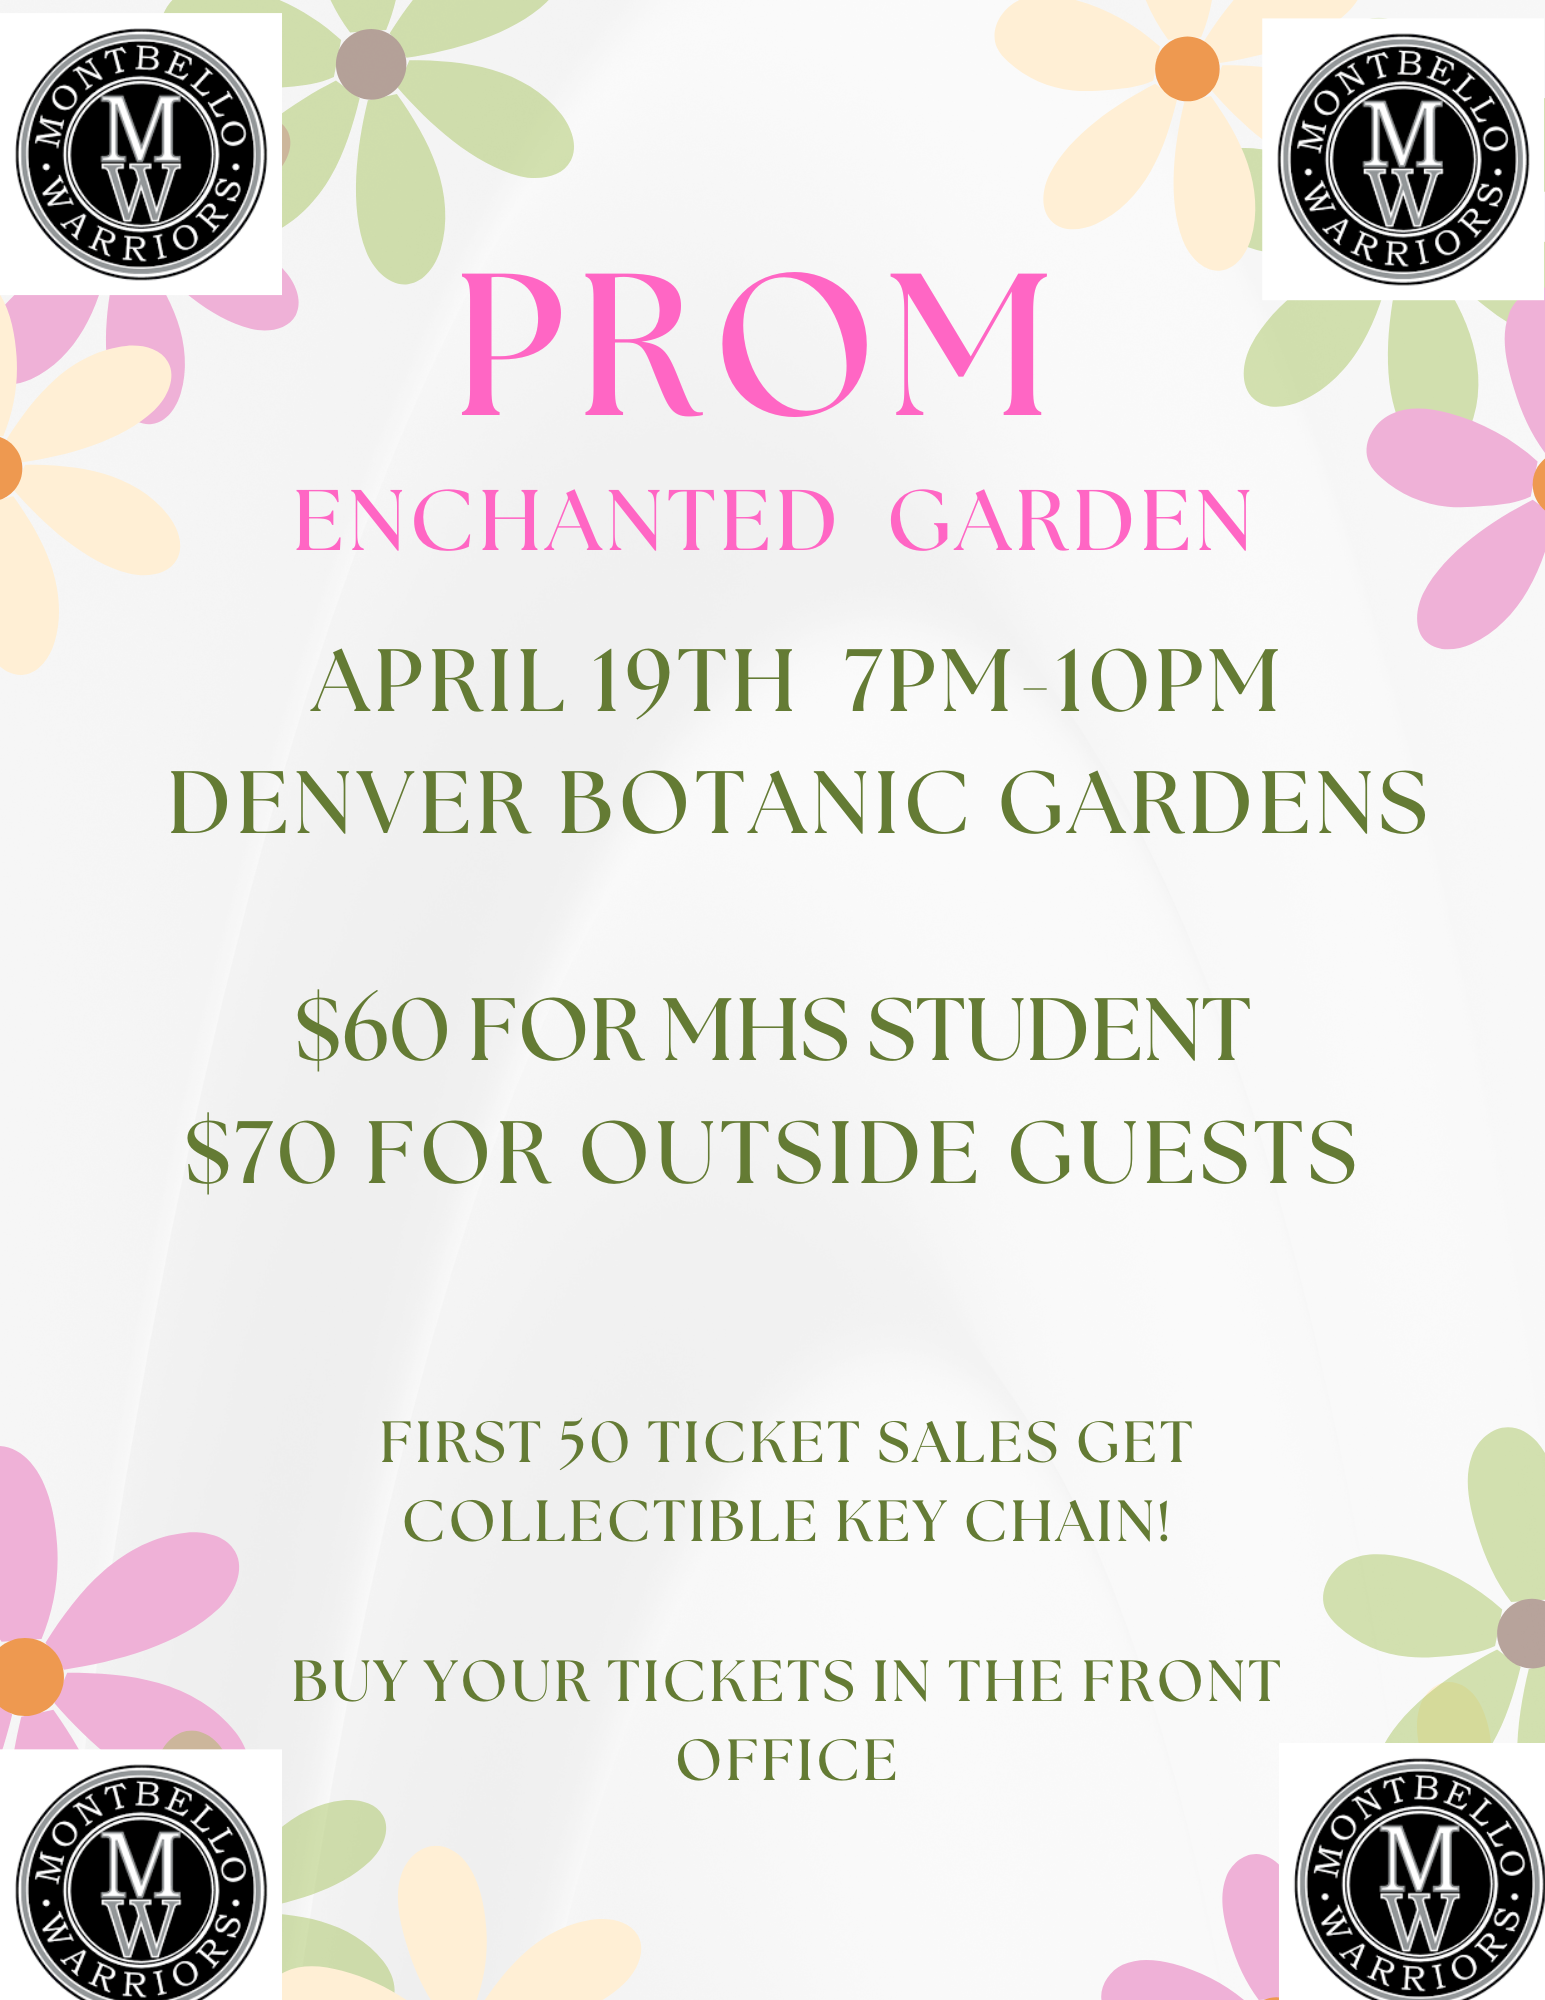 https://montbellohs.dpsk12.org/wp-content/uploads/sites/192/Prom-4.png